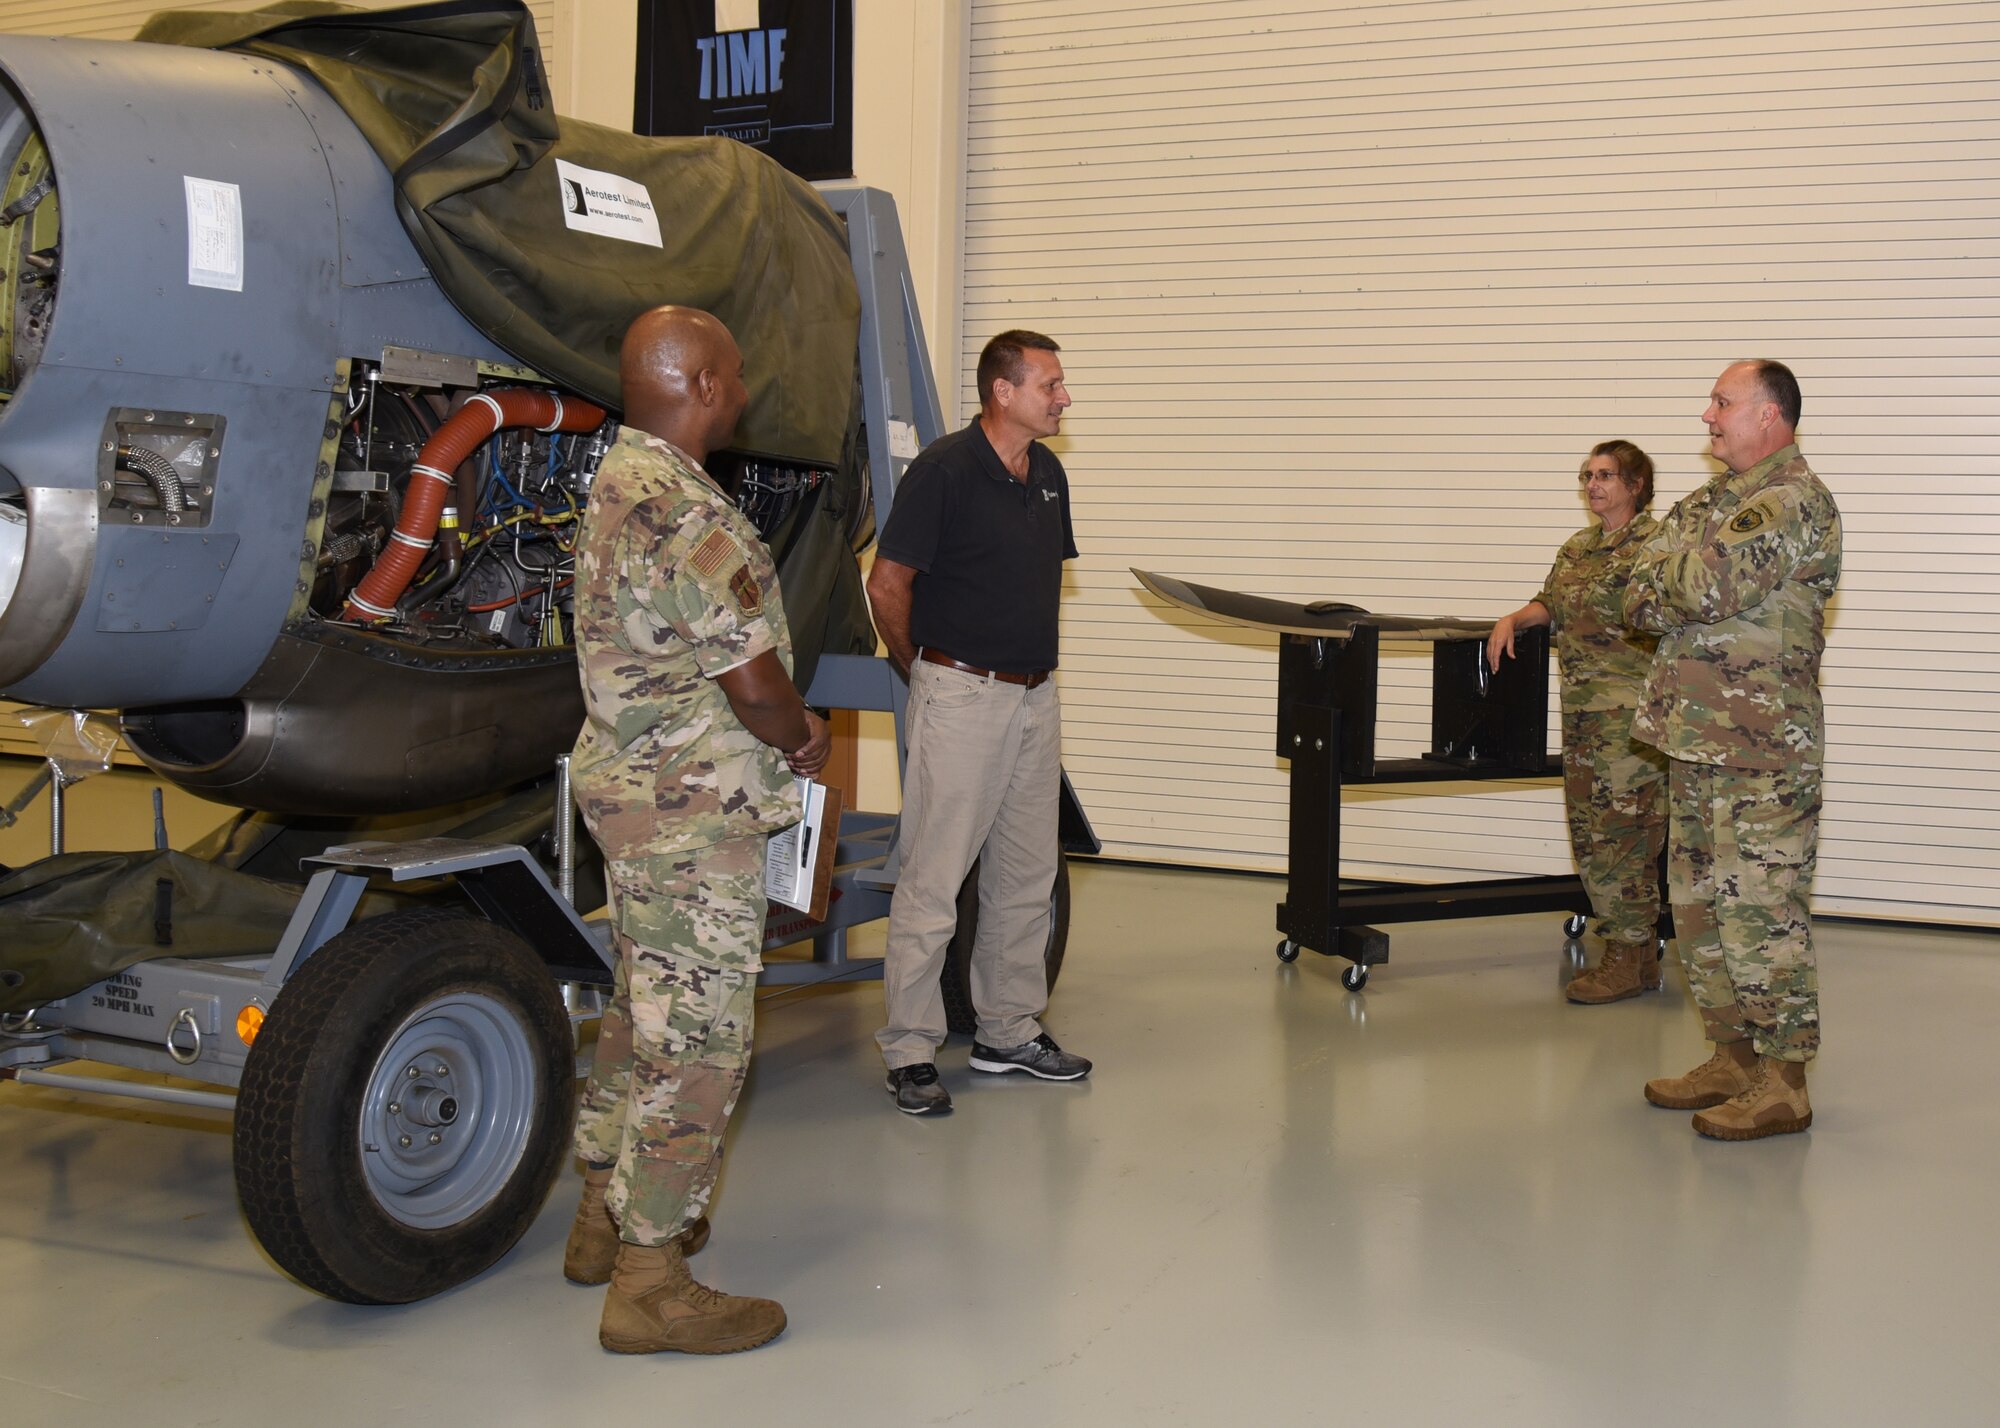 U.S. Army Maj. Gen. John E. Cardwell, Special Assistant to the Commander, North American Aerospace Command and U. S. Northern Command for Reserve Matters, visited the 403rd Wing at Keesler Air Force Base, Mississippi. Aug 13, 2019. The general was briefed on the job duties of the 403rd Aircraft Maintenance Squadron propulsion shop by Master Sgt. Donald Maloid, 403rd AMXS propulsion craftsman. The general was also briefed on the different missions of the 403rd Wing and toured a WC-130J Super Hercules aircraft, which was undergoing a routine inspection. (U.S. Air Force photo by Jessica L. Kendziorek)